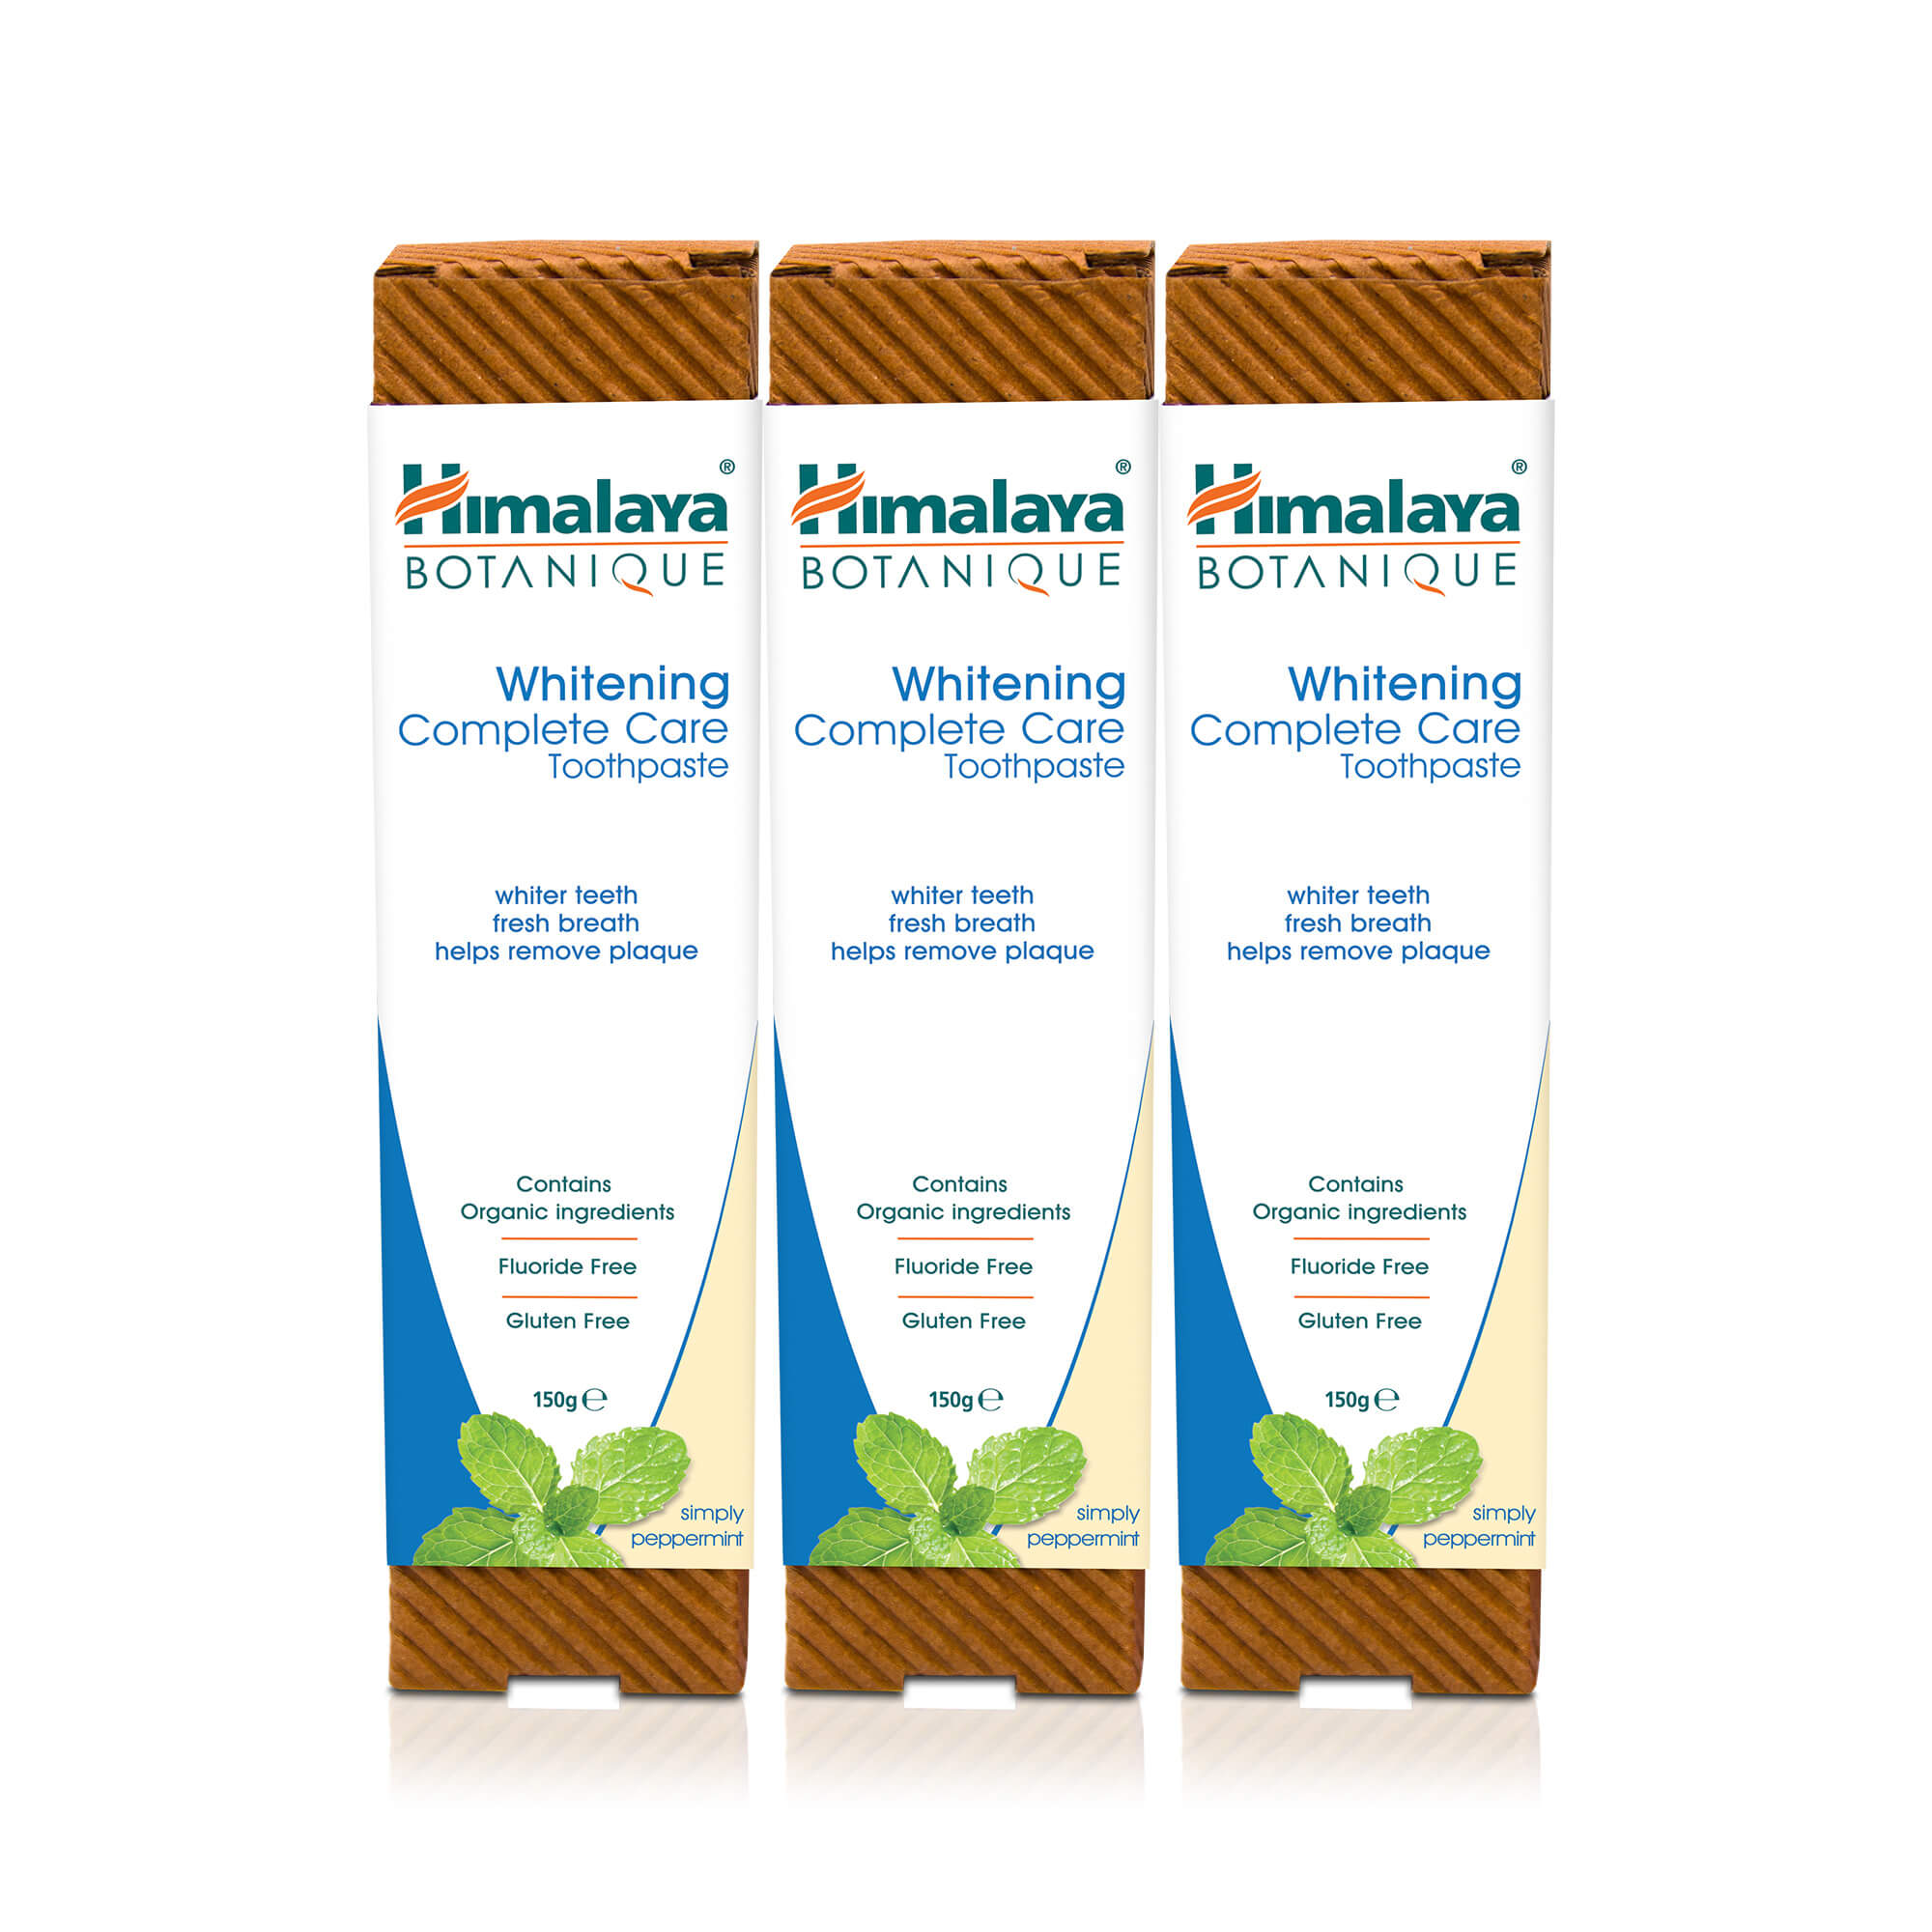 Himalaya BOTANIQUE Whitening Complete Care Toothpaste - Simply Peppermint - 150g (Pack of 3)